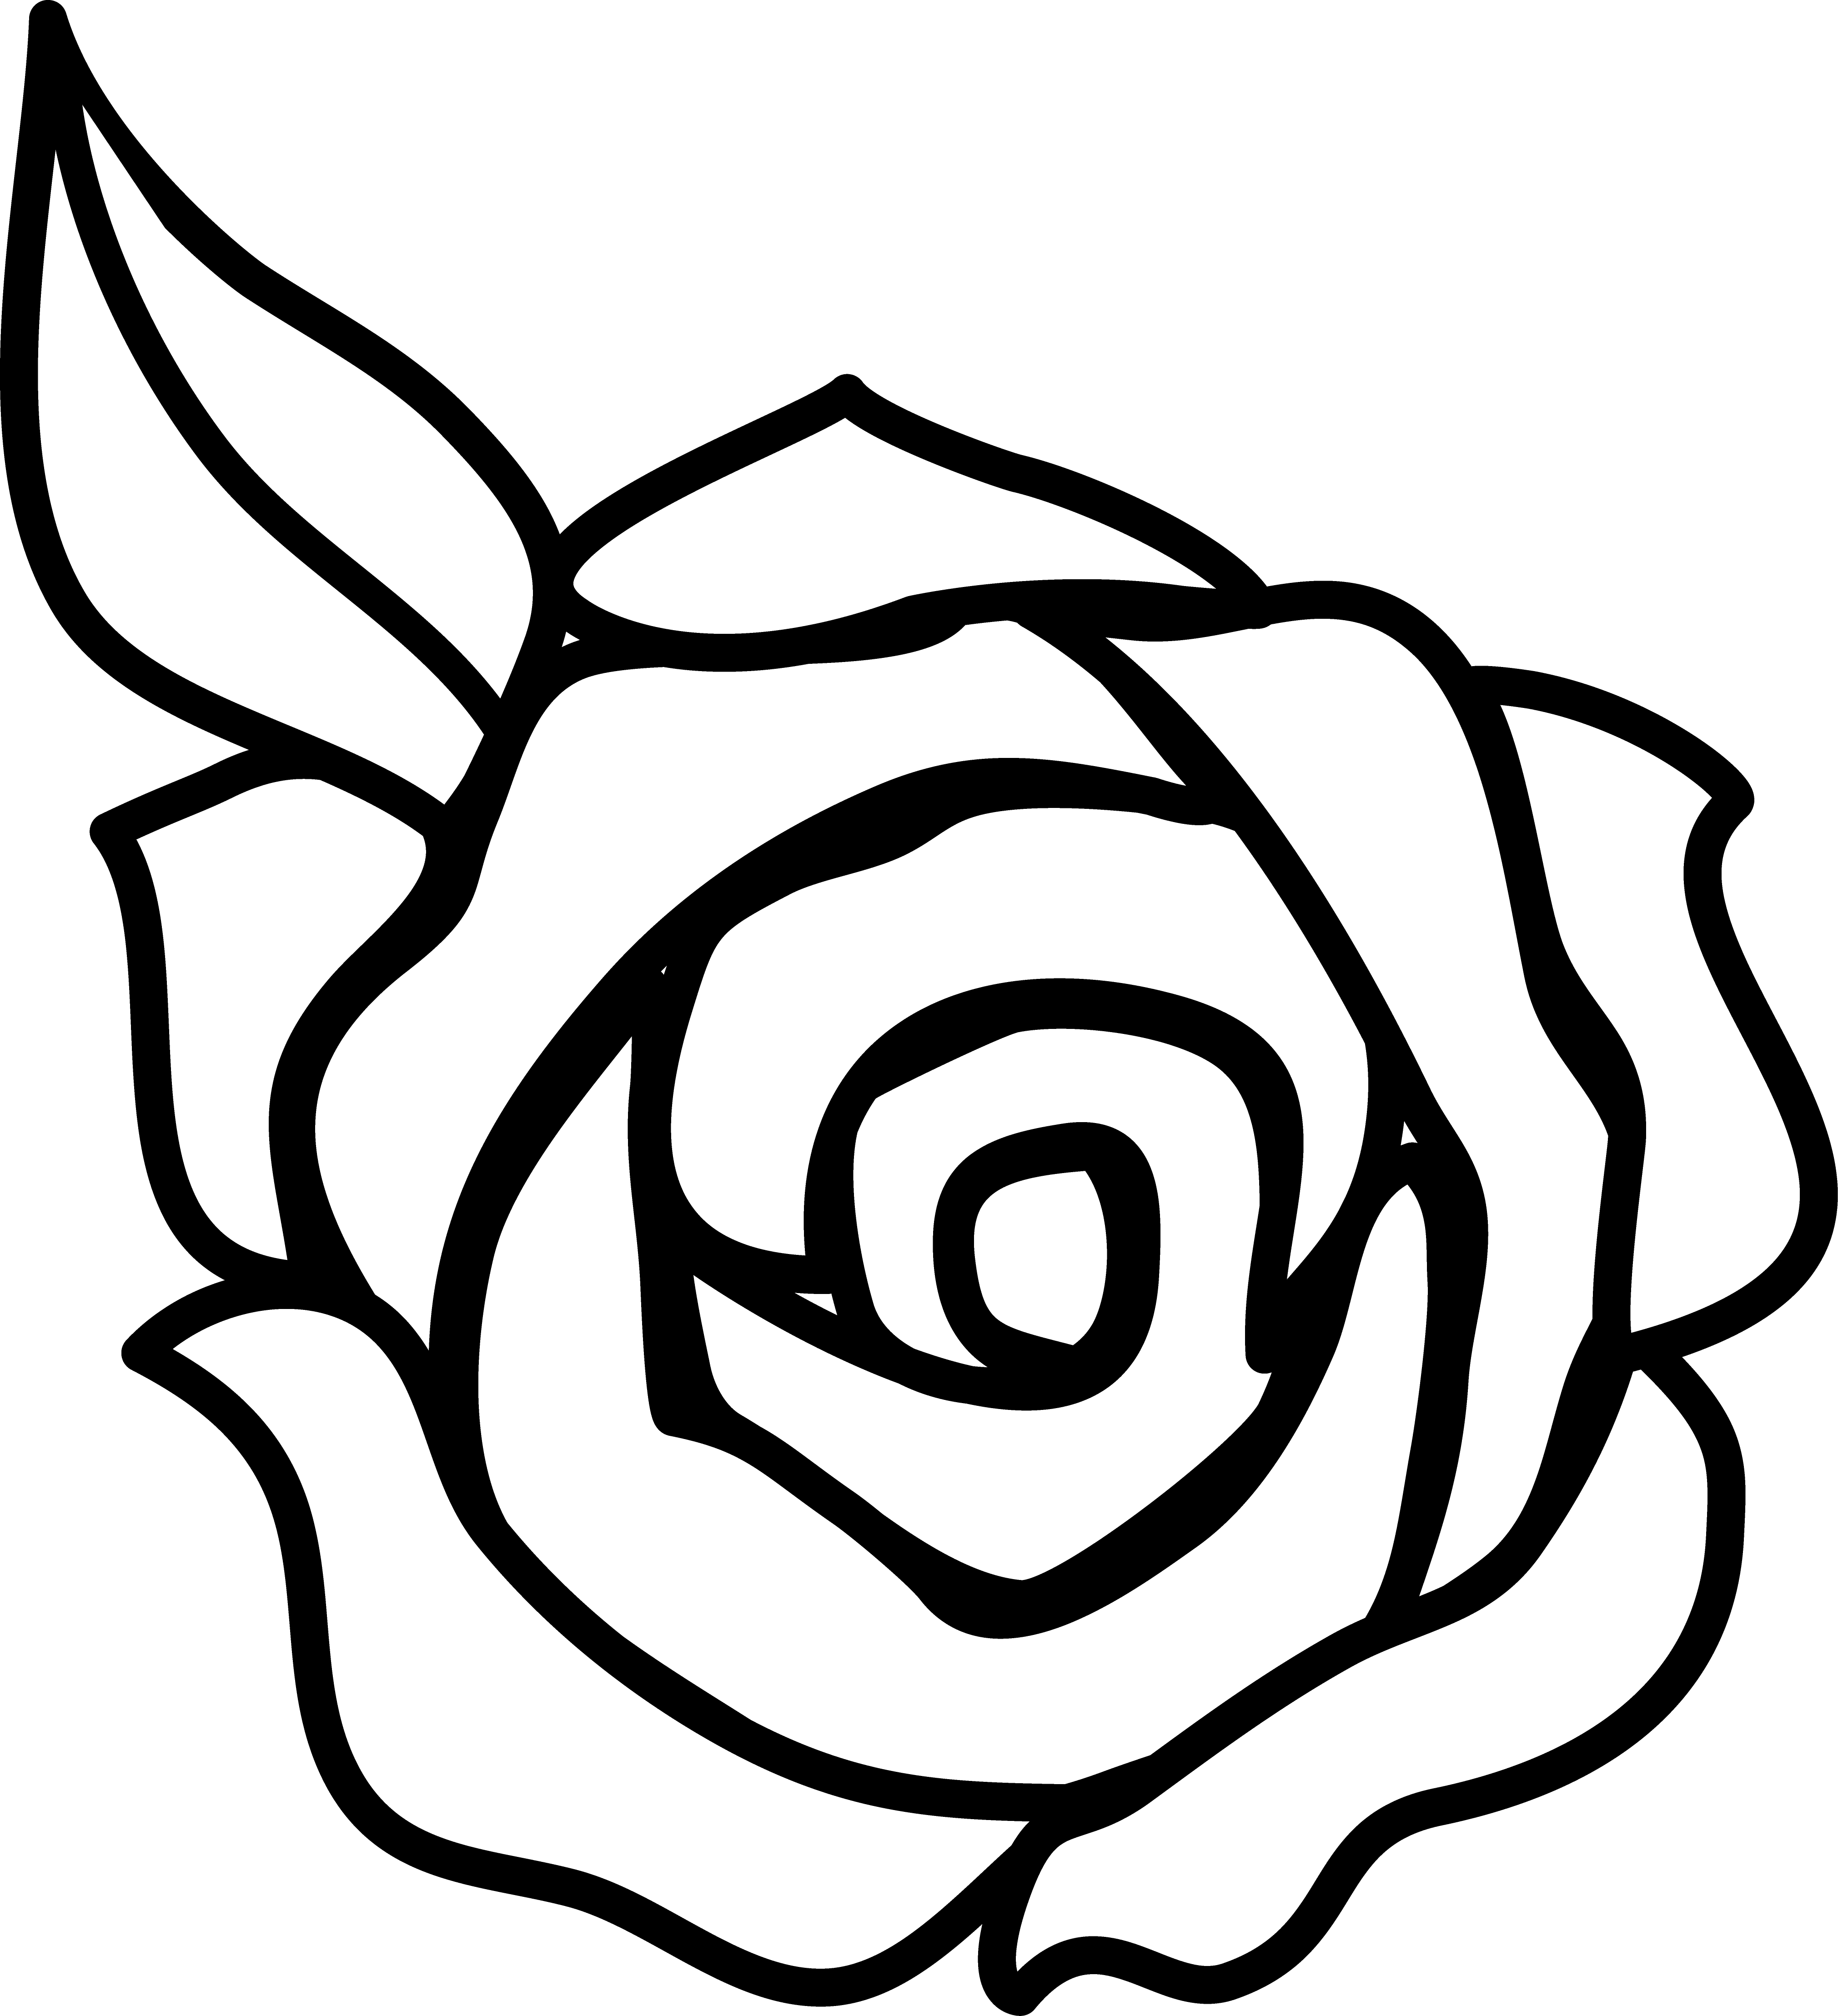 Fist clipart air sketch. Black and white rose